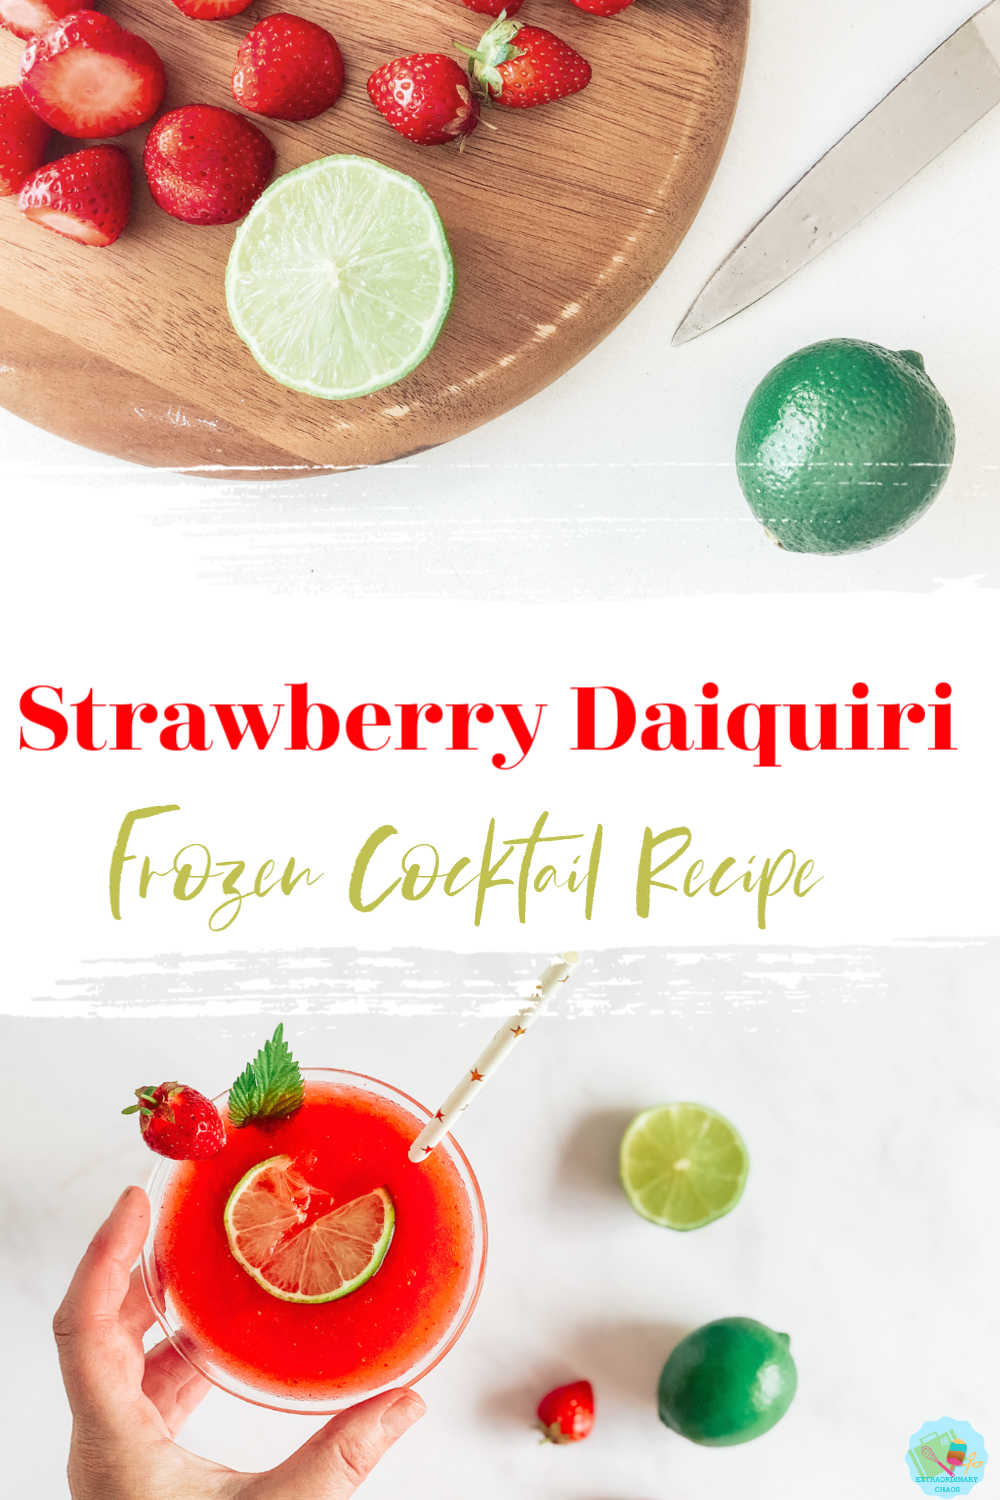 Frozen strawberry daiquiri recipe made with fresh strawberries for summer parties and sunny garden cocktails